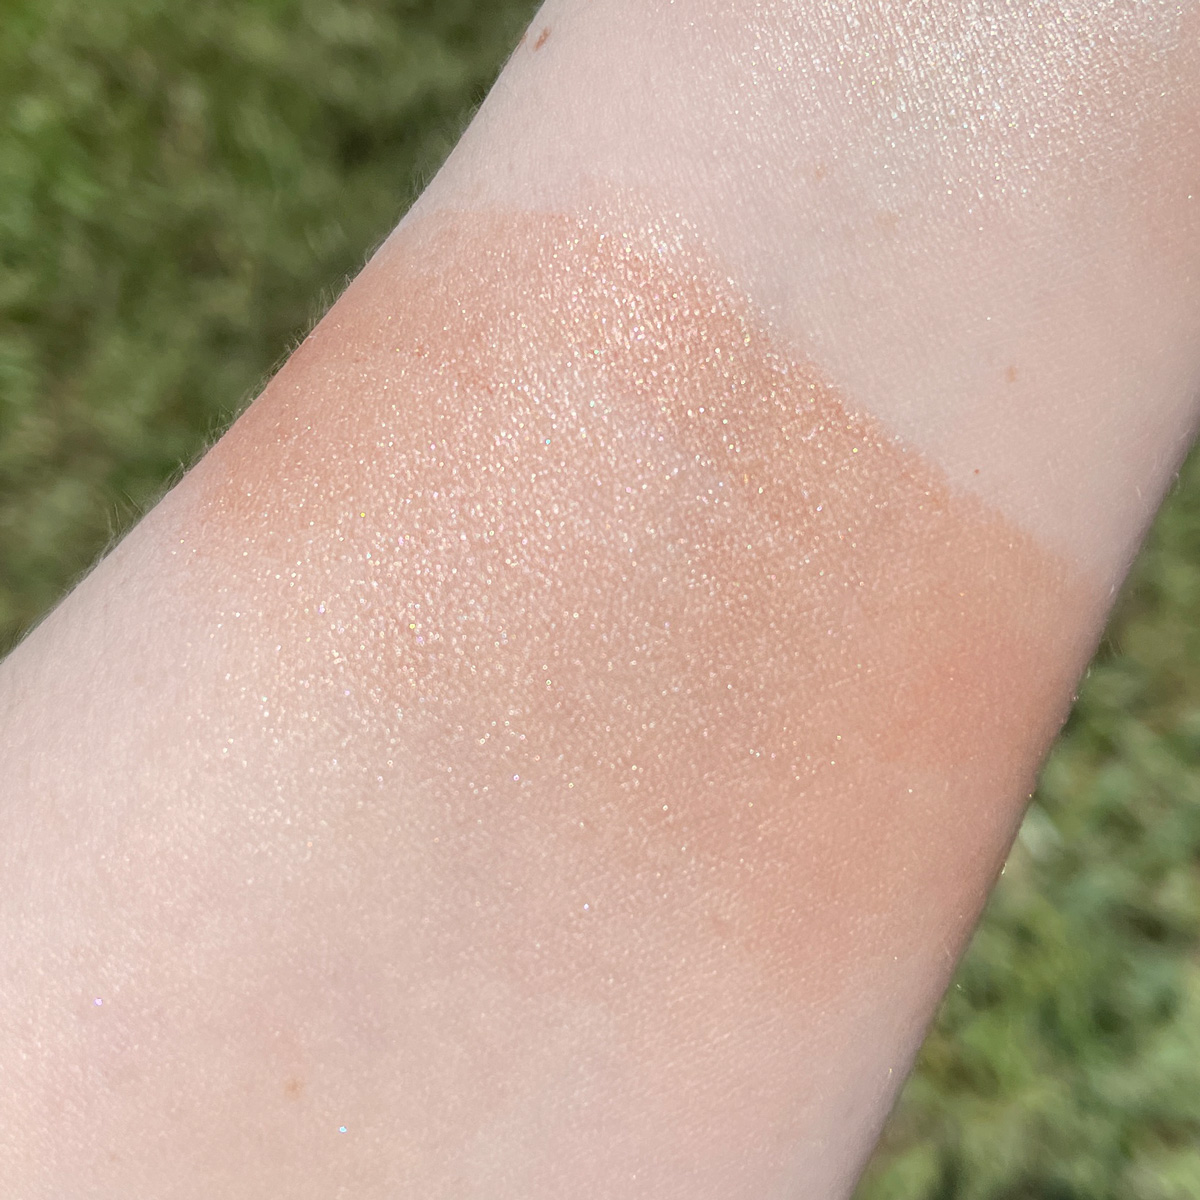 Lime Crime Sunkissed Glimmering Skin Stick in Maui swatched on pale skin